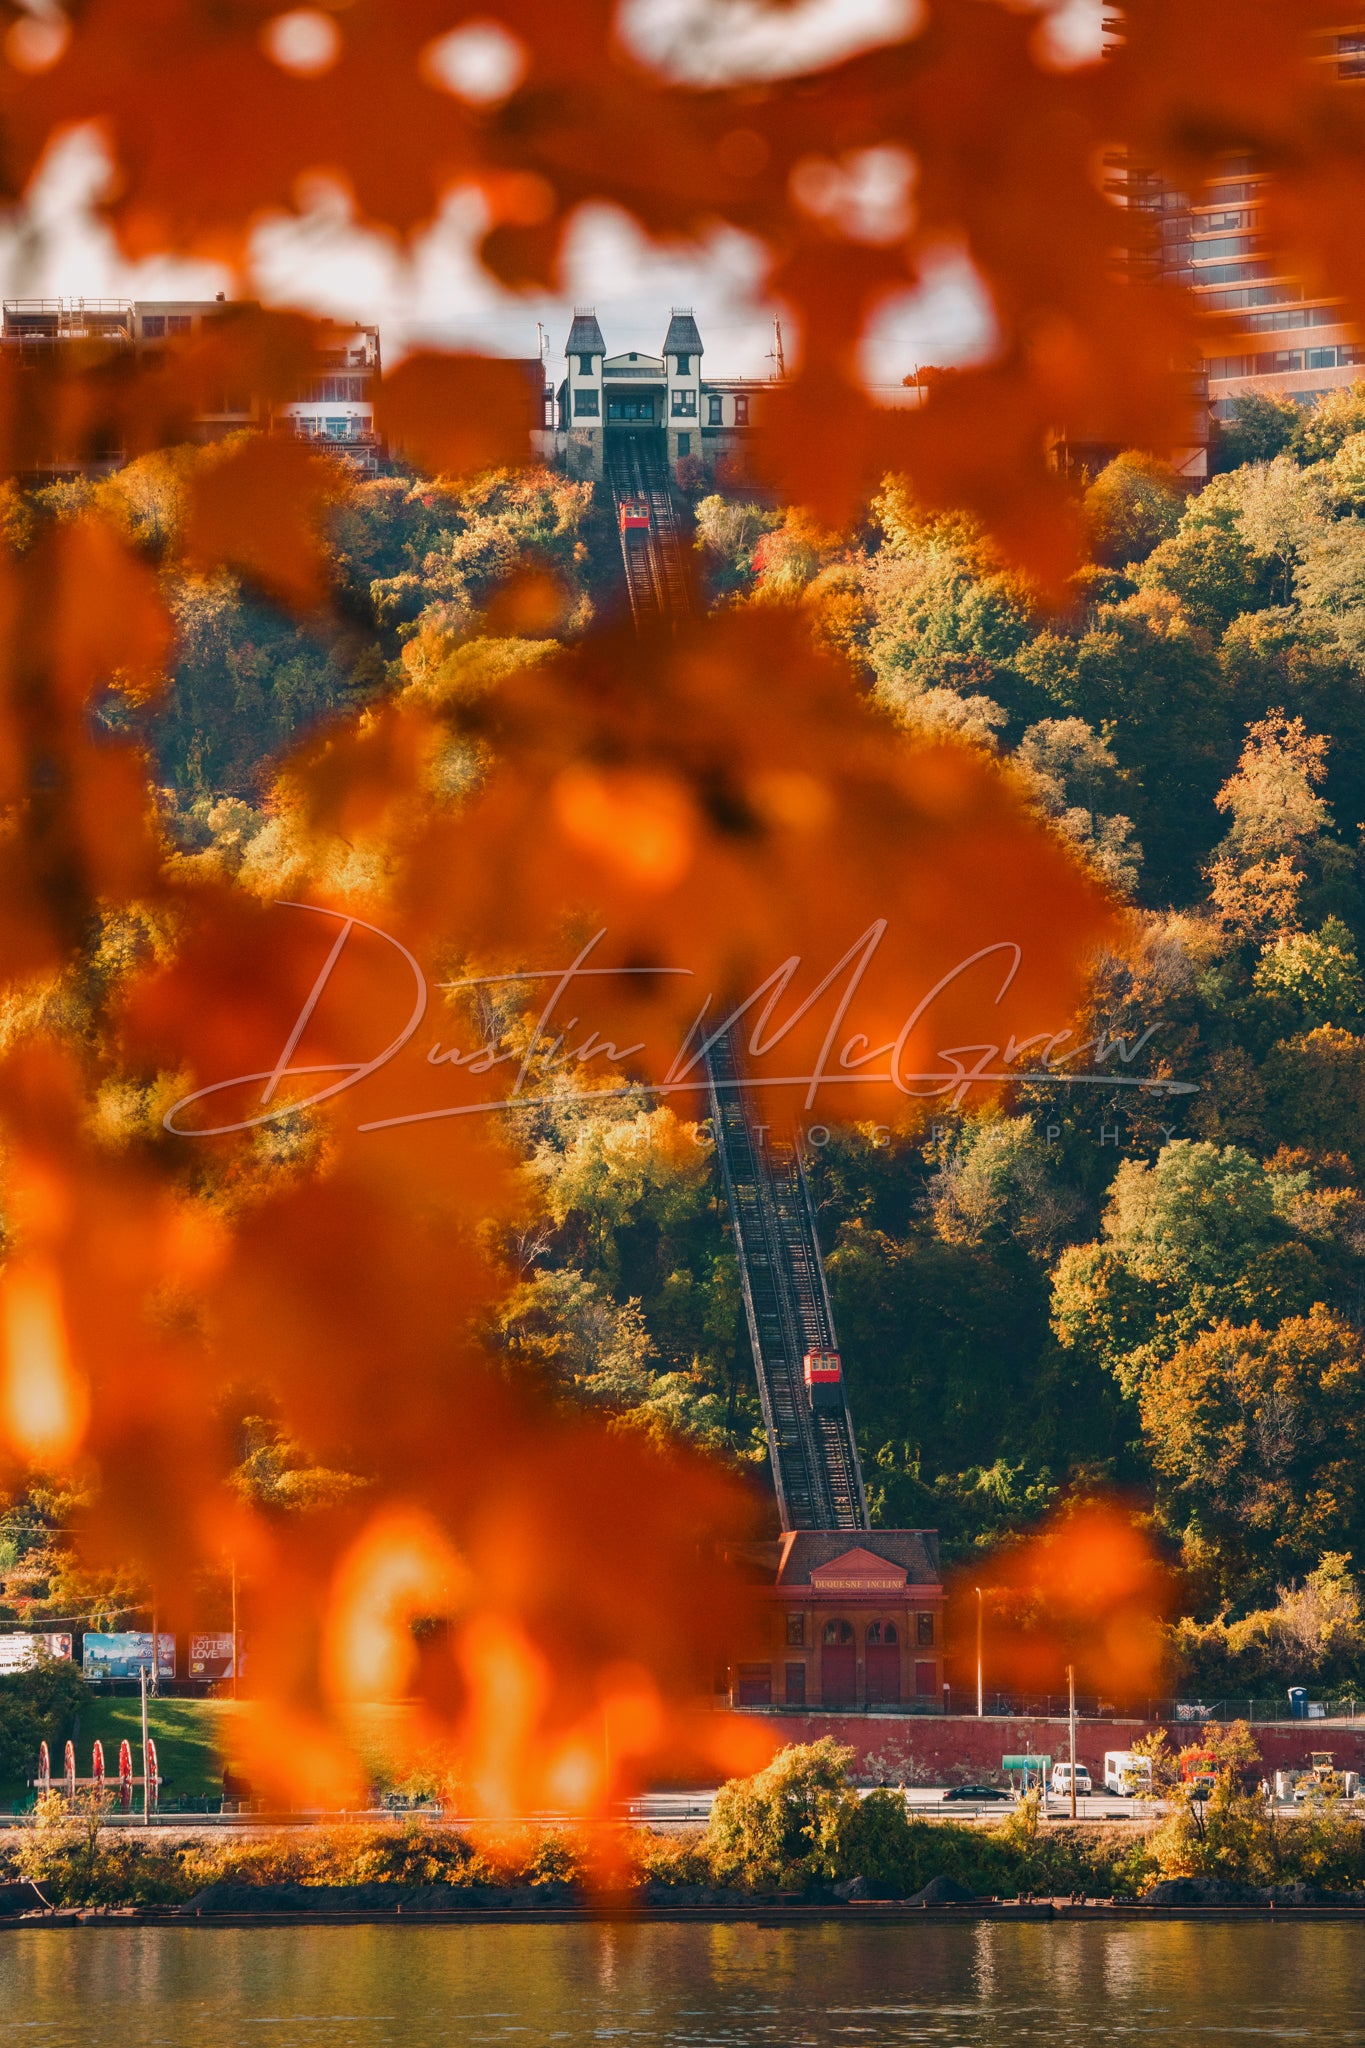 Duquesne Incline Framed by Vibrant Fall Color